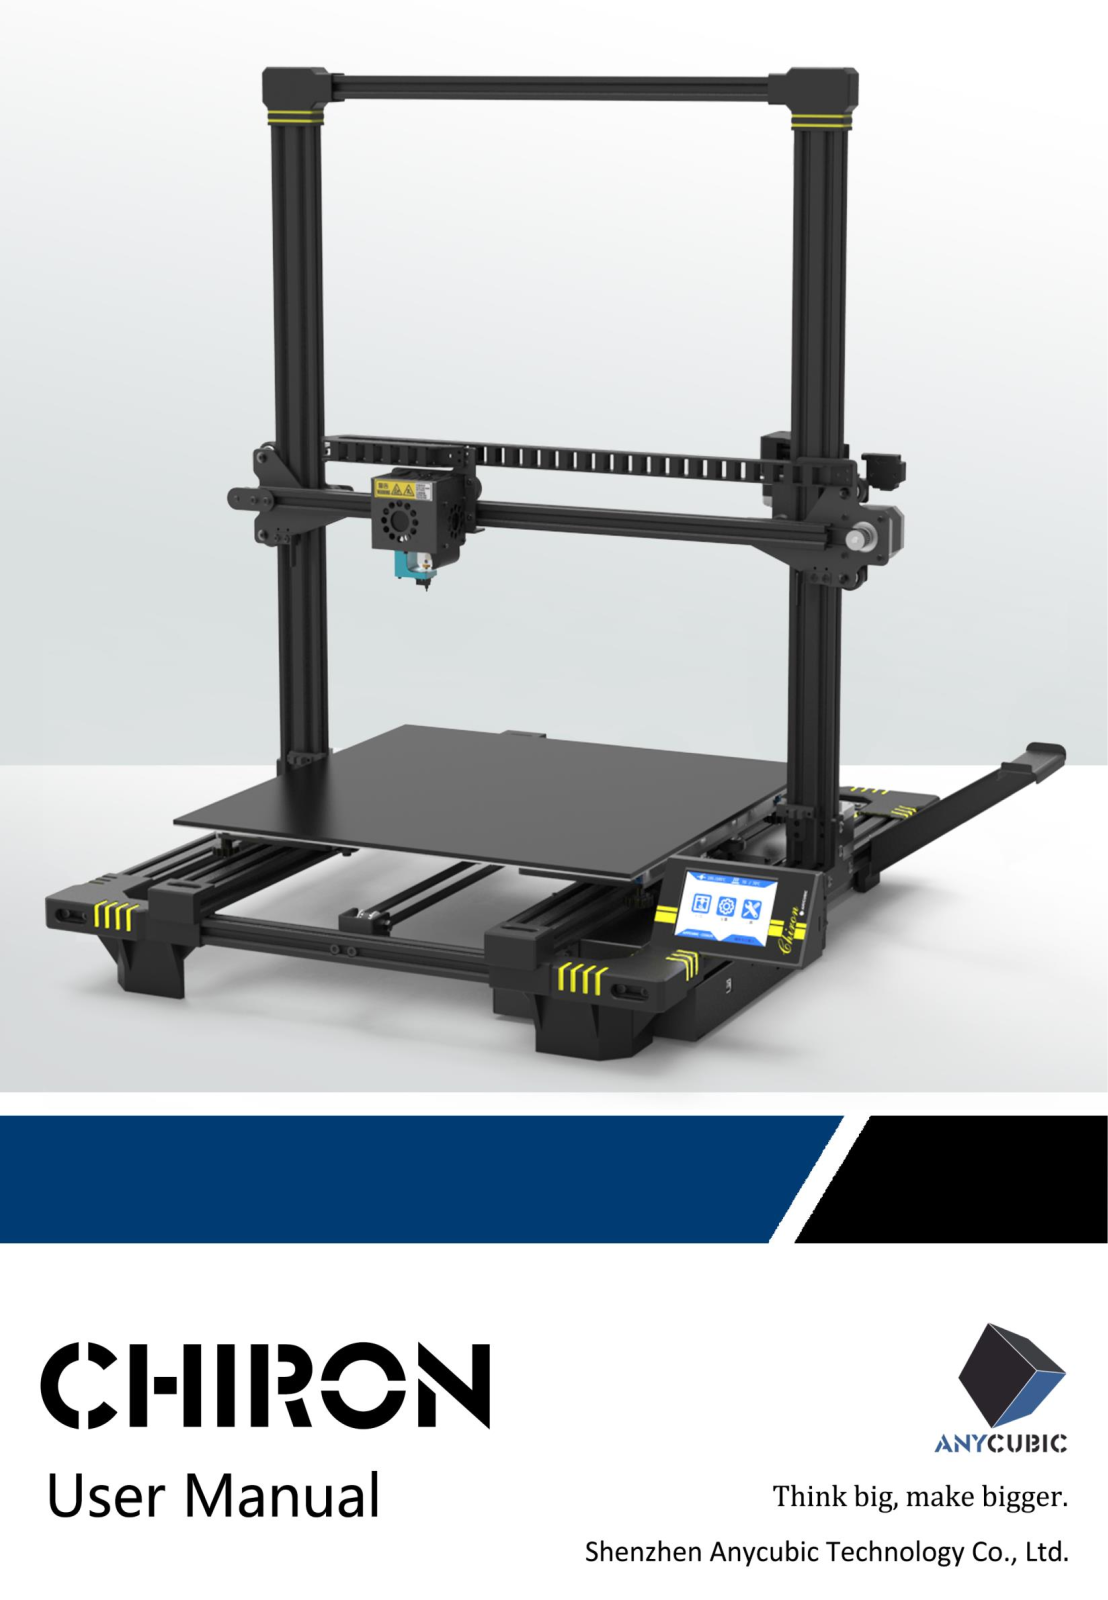 Anycubic Chiron User Manual